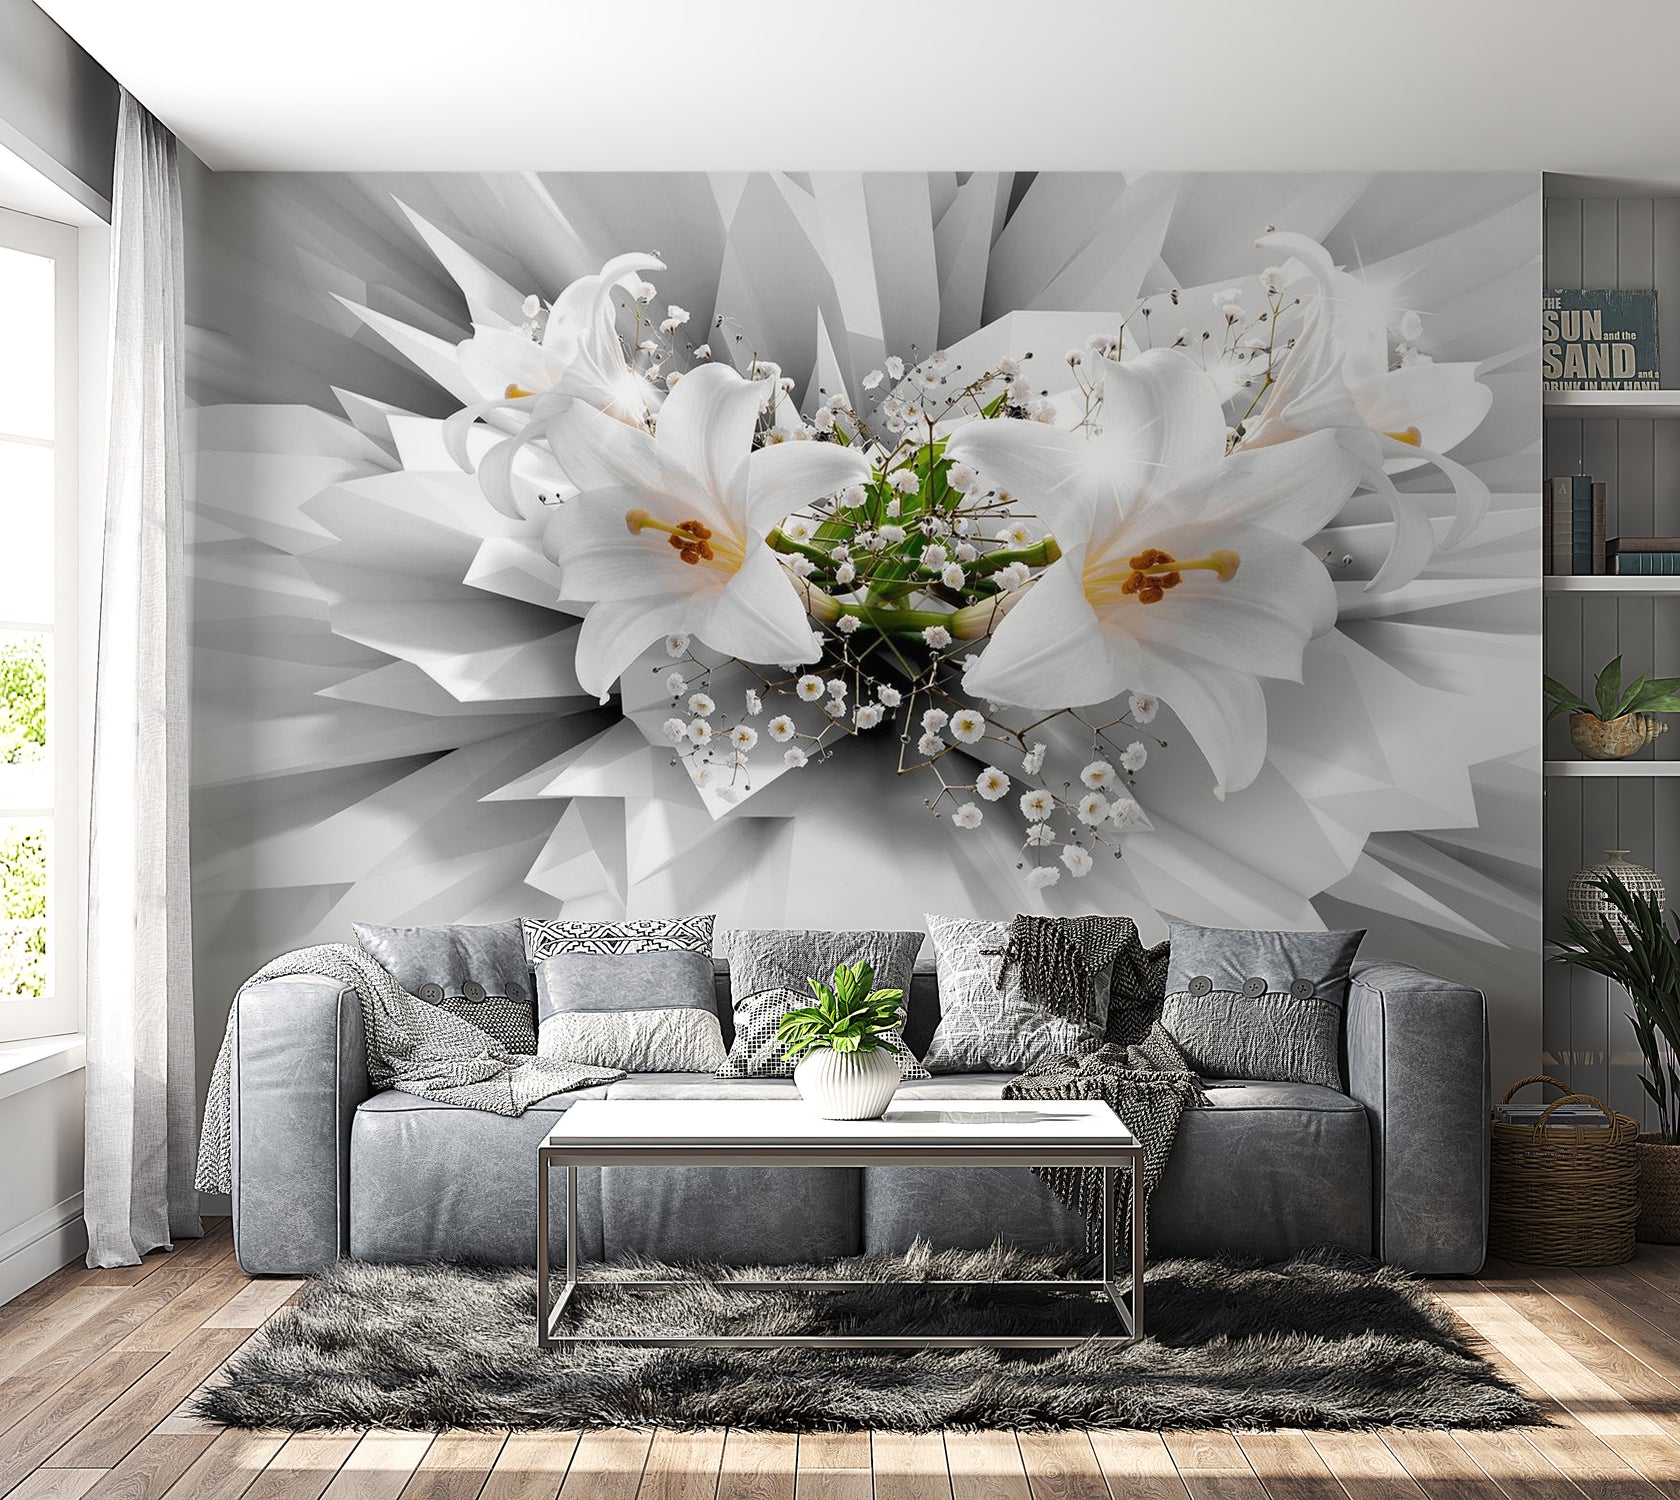 Peel & Stick Floral Wall Mural - Floral Explosion - Removable Wall Decals